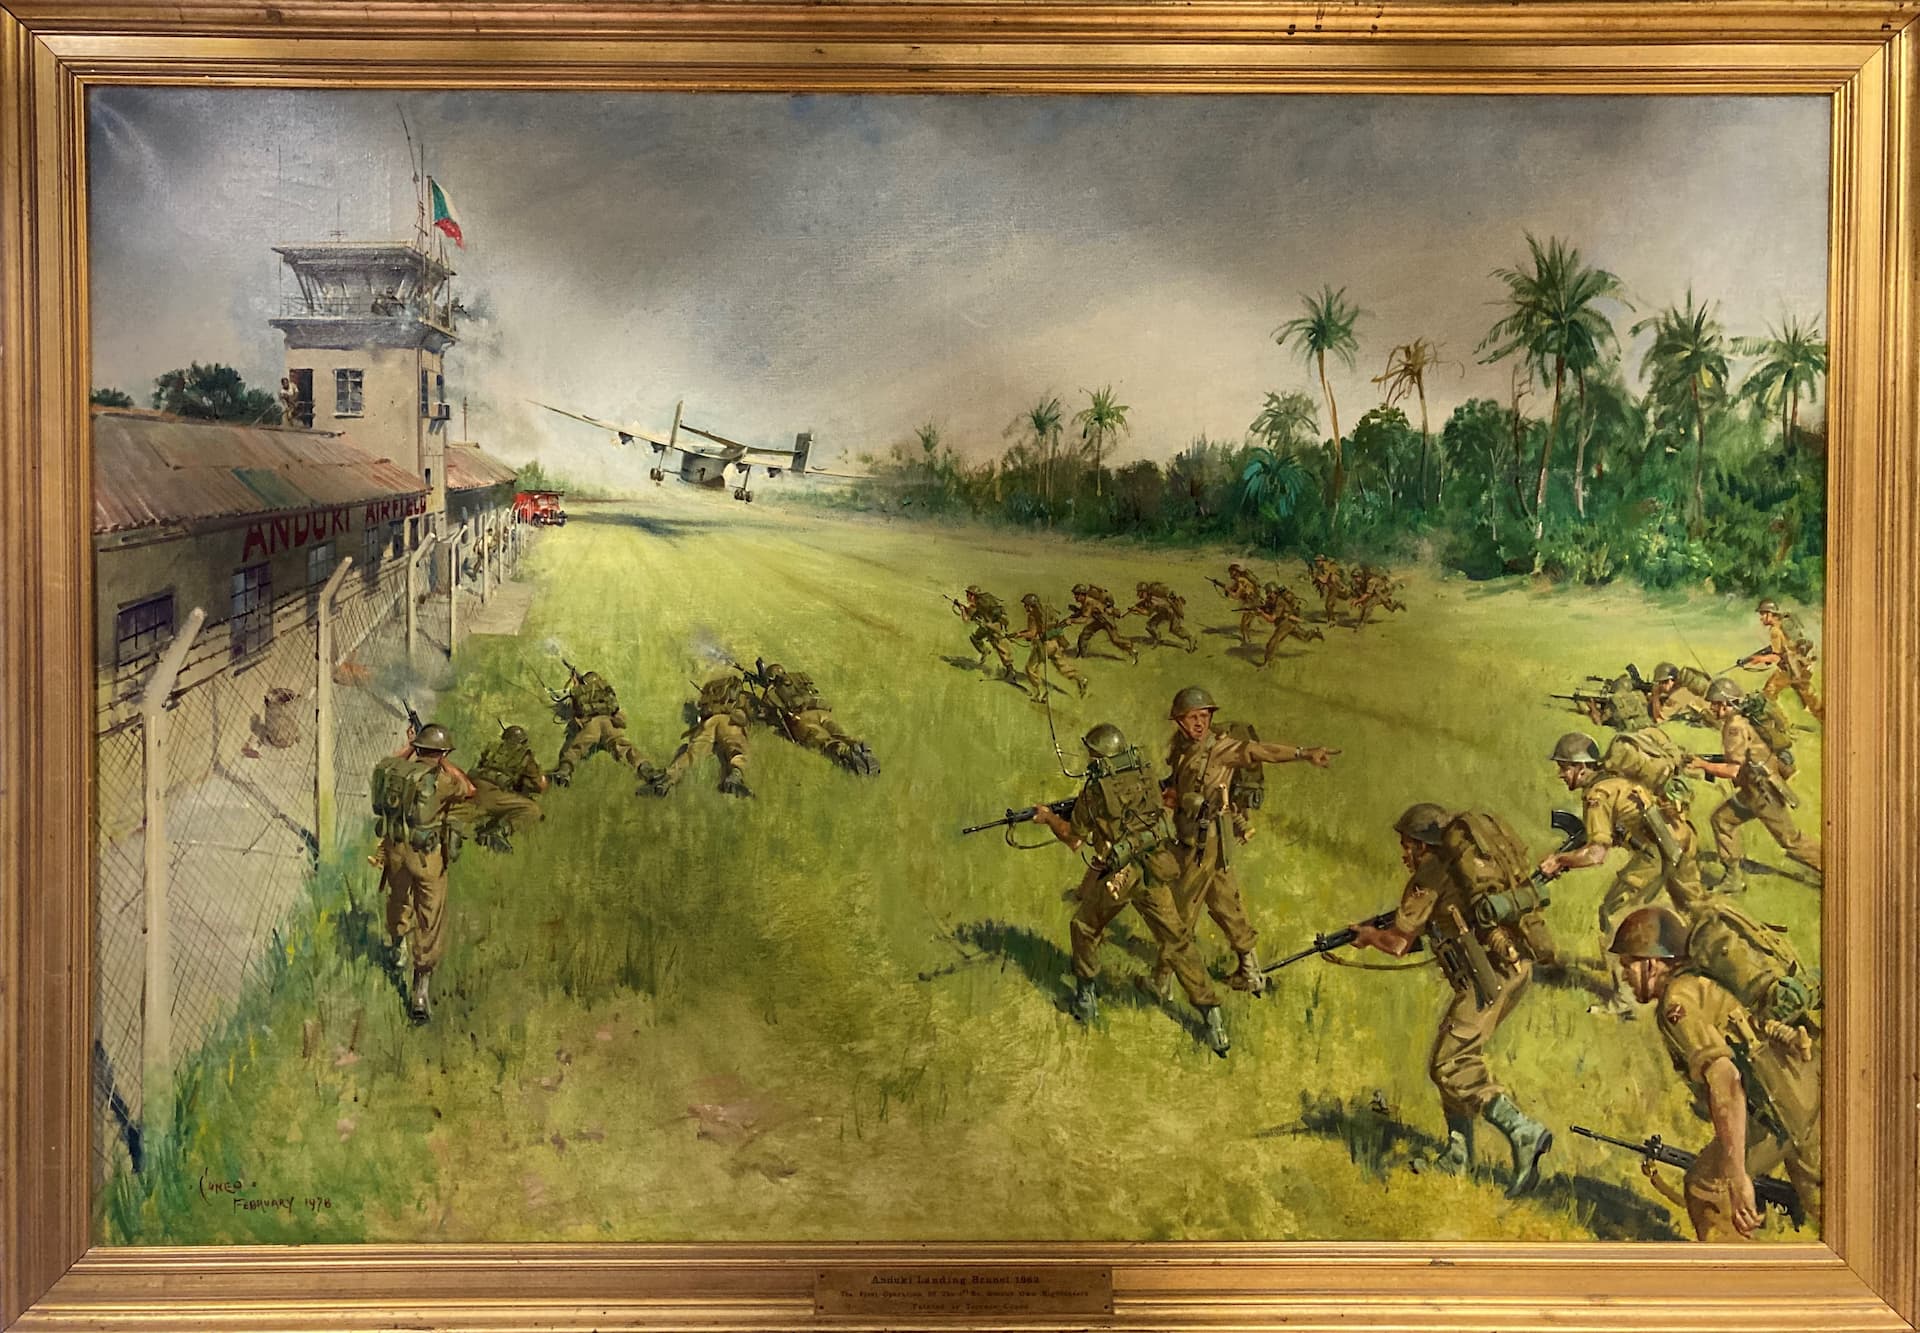 Terence Cuneo, Anduki Landing, Brunei, 1962 - Image owned by The Highlanders Museum